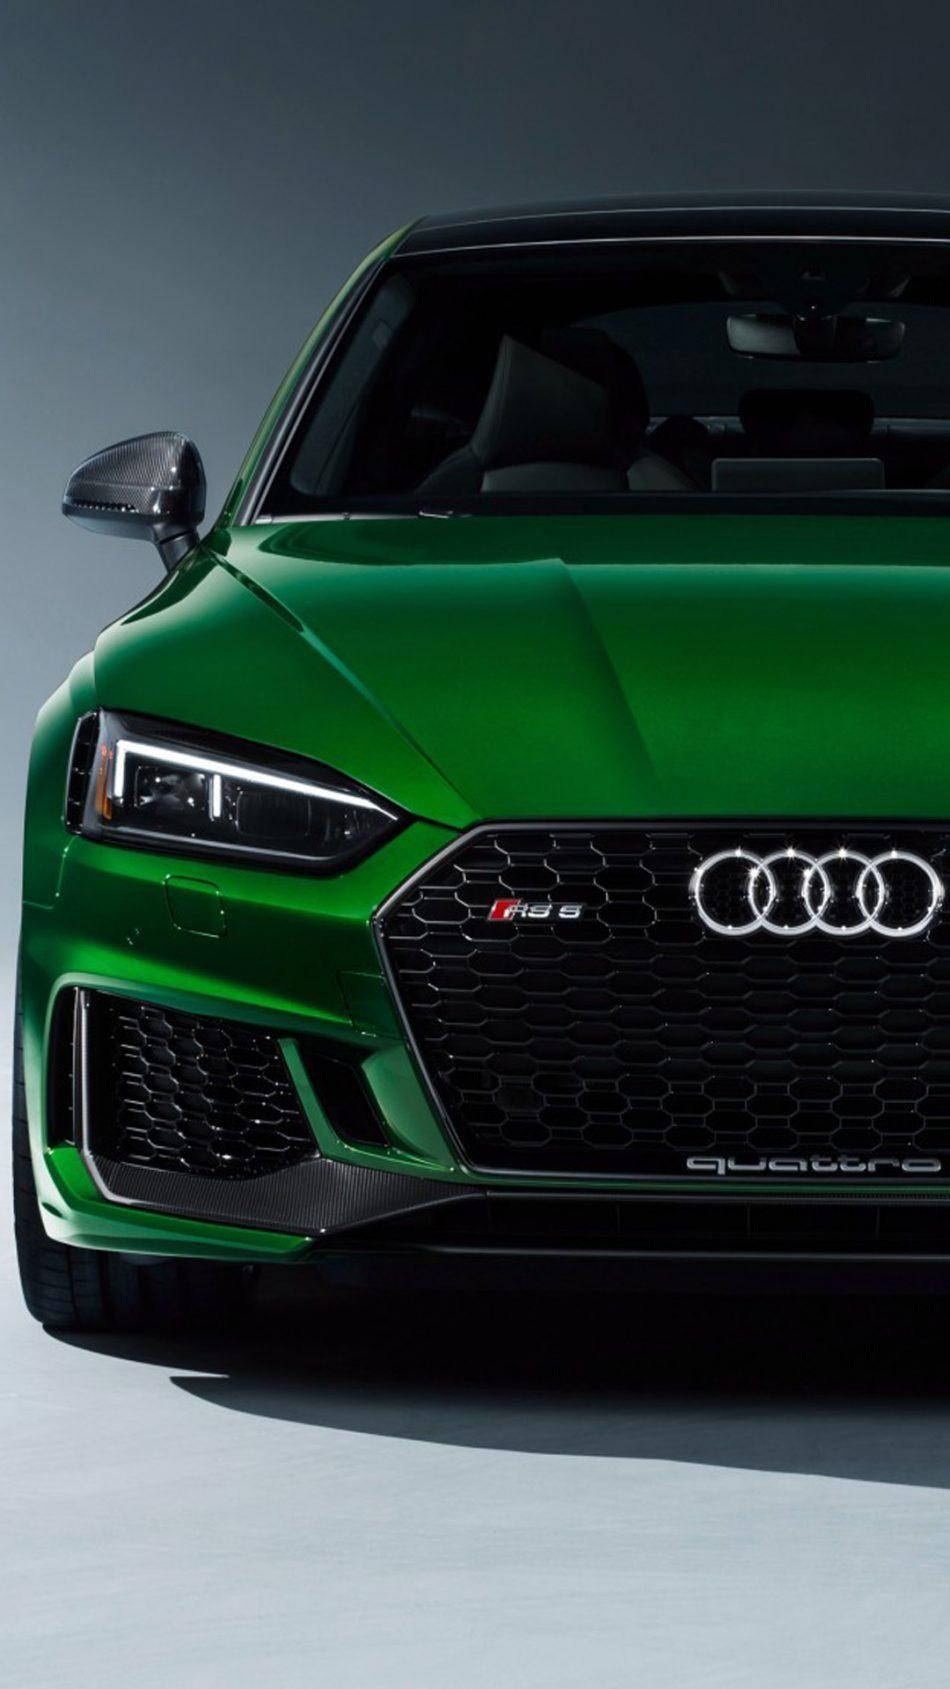 Caption: Striking Green 2019 Audi RS 5 in High Definition Wallpaper